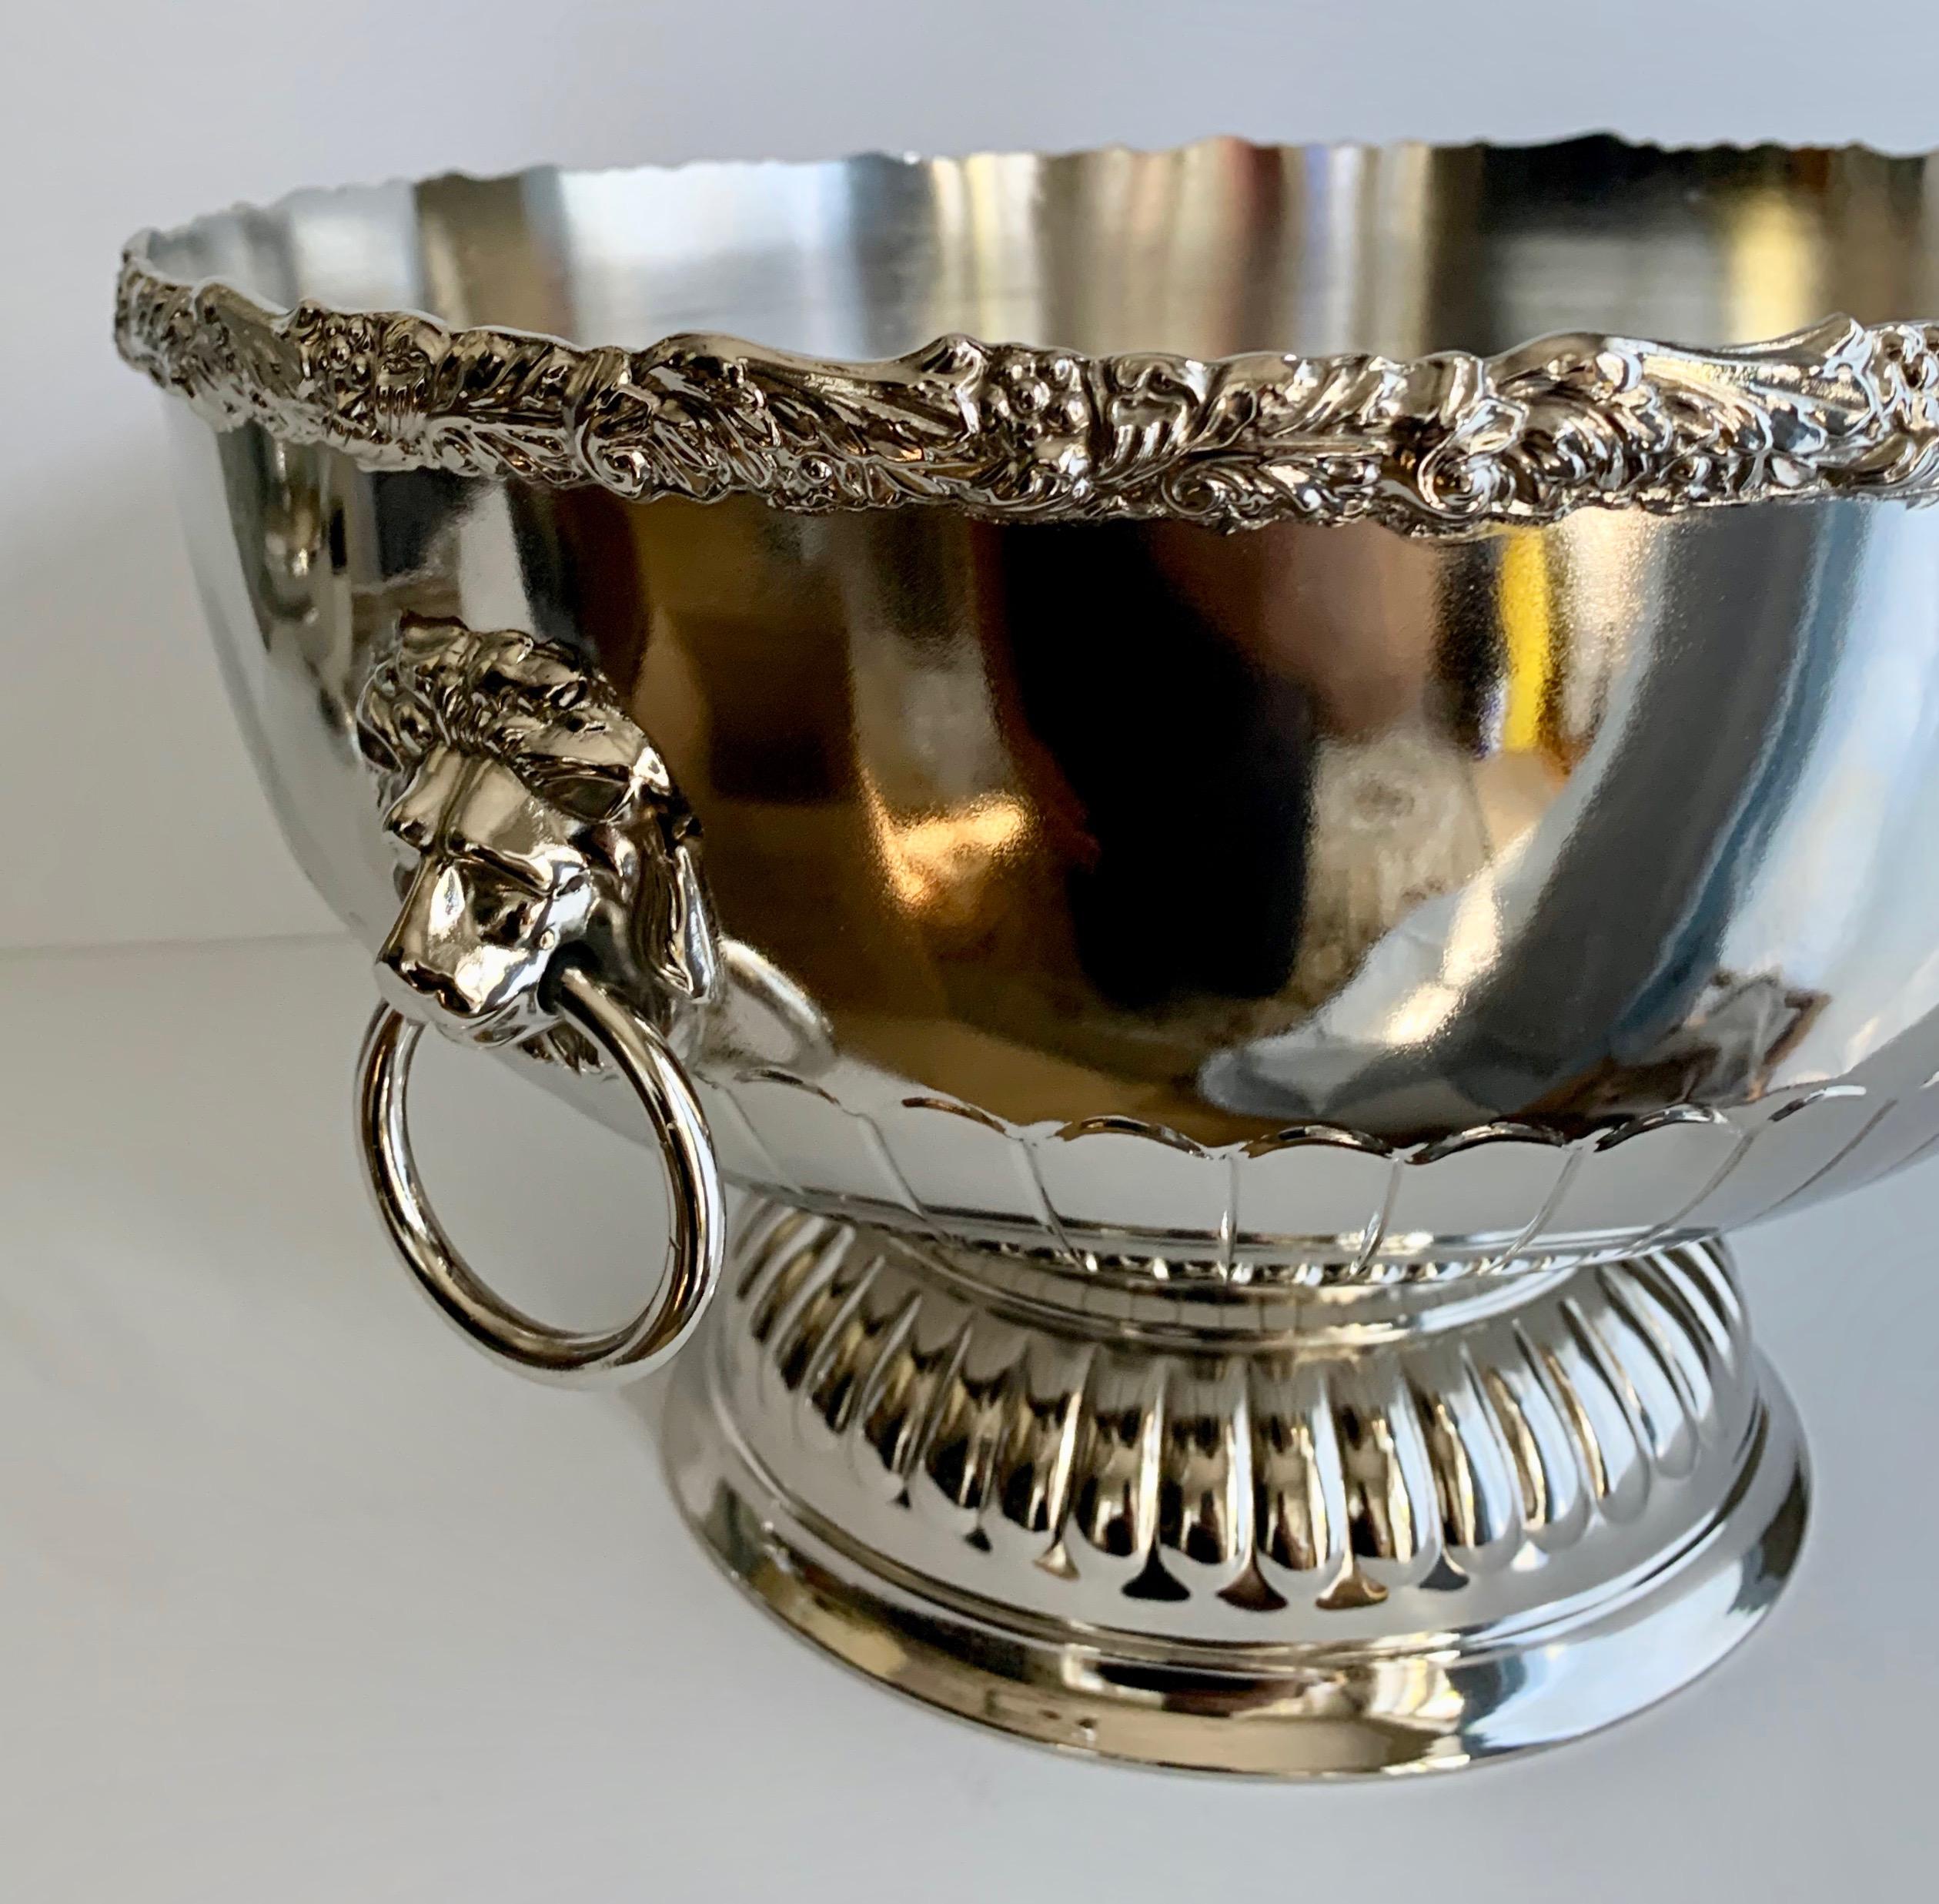 Plated English Silver Punch Bowl with Rim and Lion Handle Details